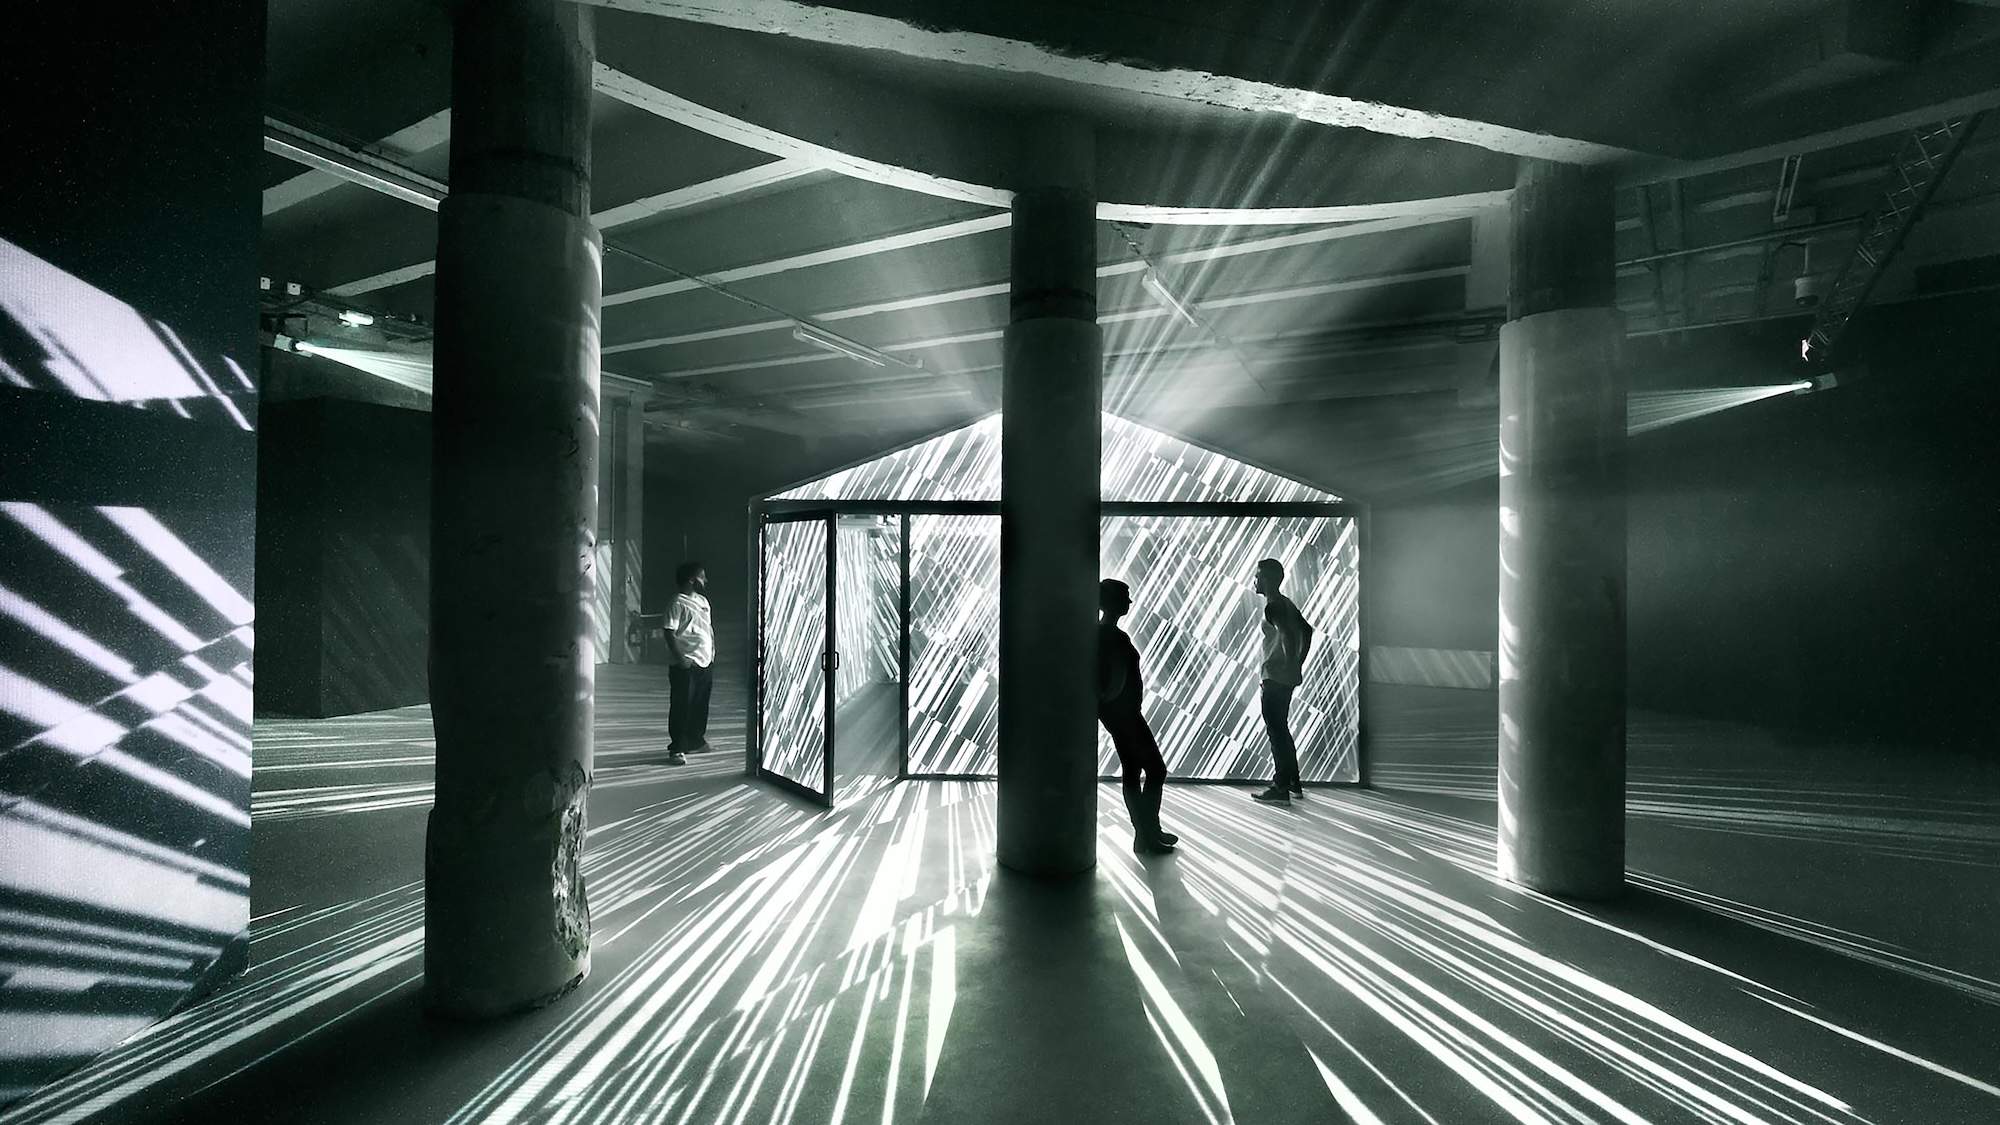 Immersive art experience opening in Boston’s Downtown Crossing